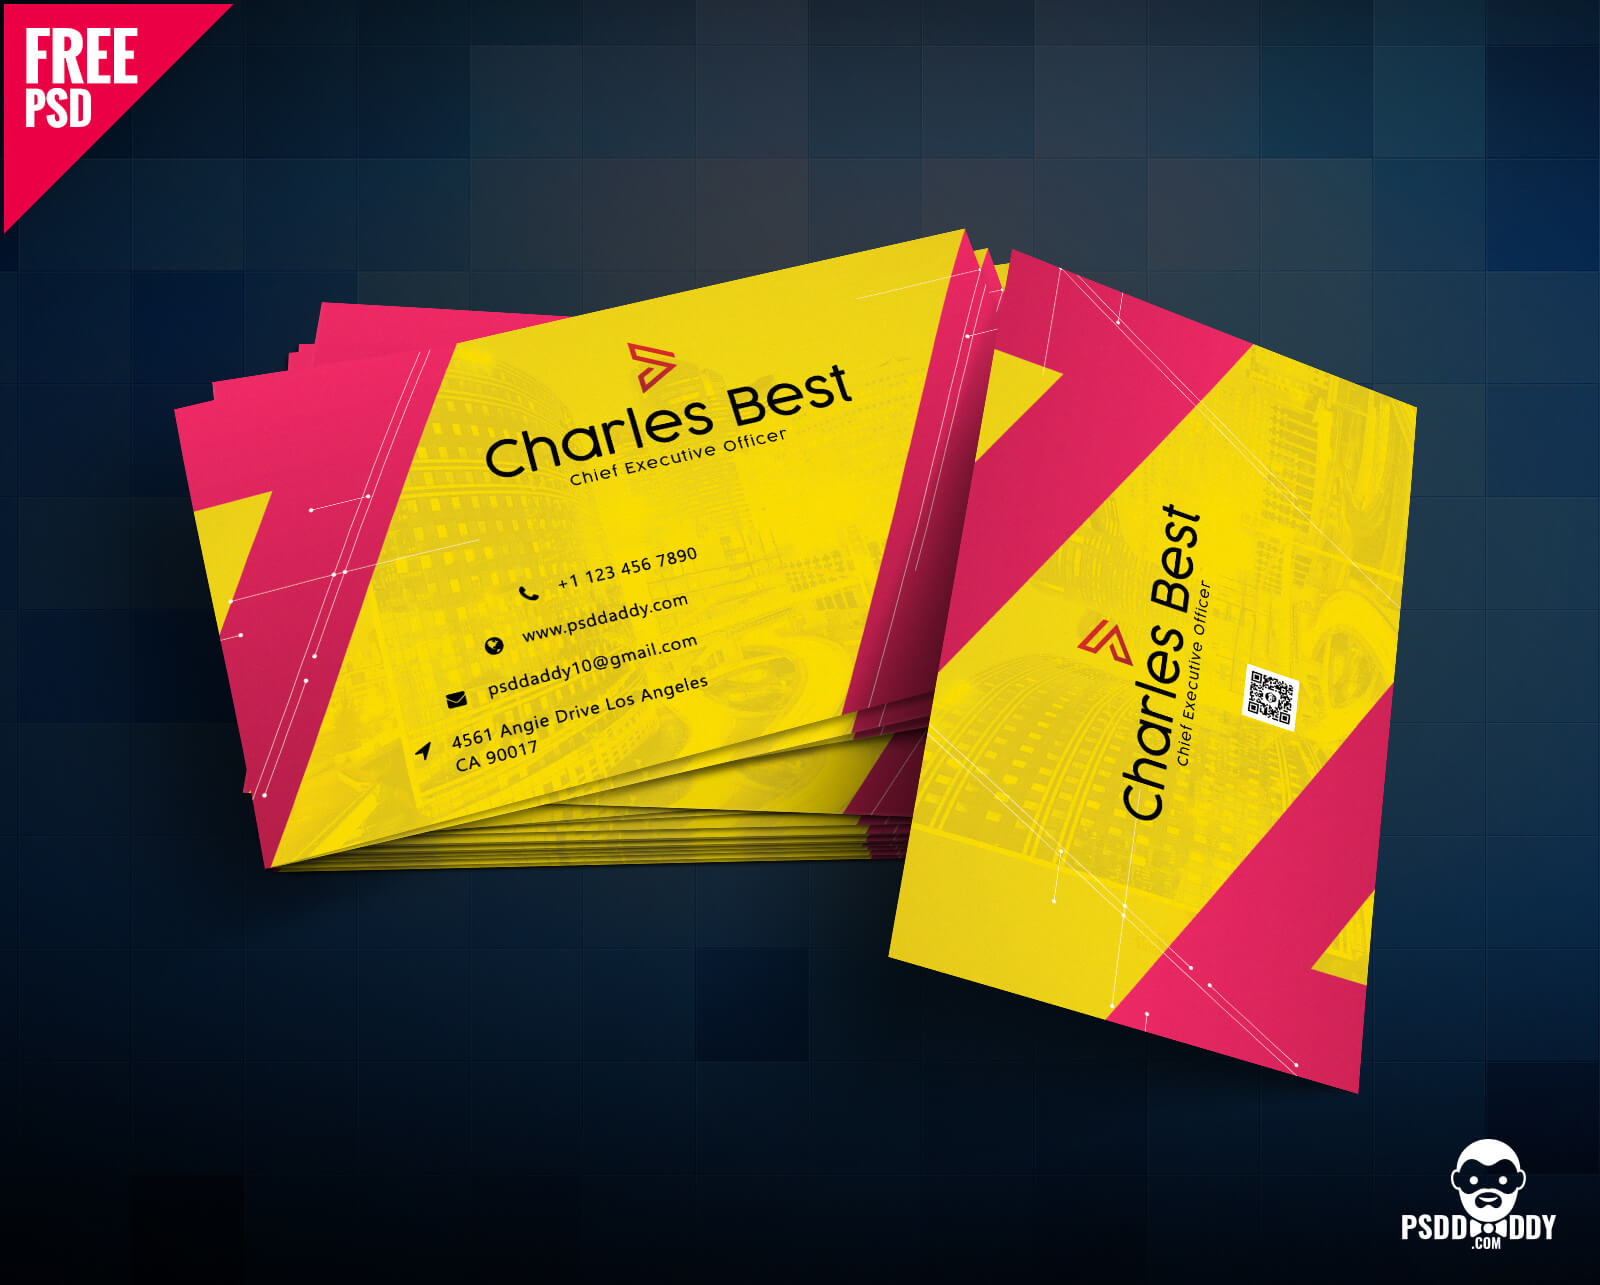 Download] Creative Business Card Free Psd | Psddaddy Inside Name Card Design Template Psd